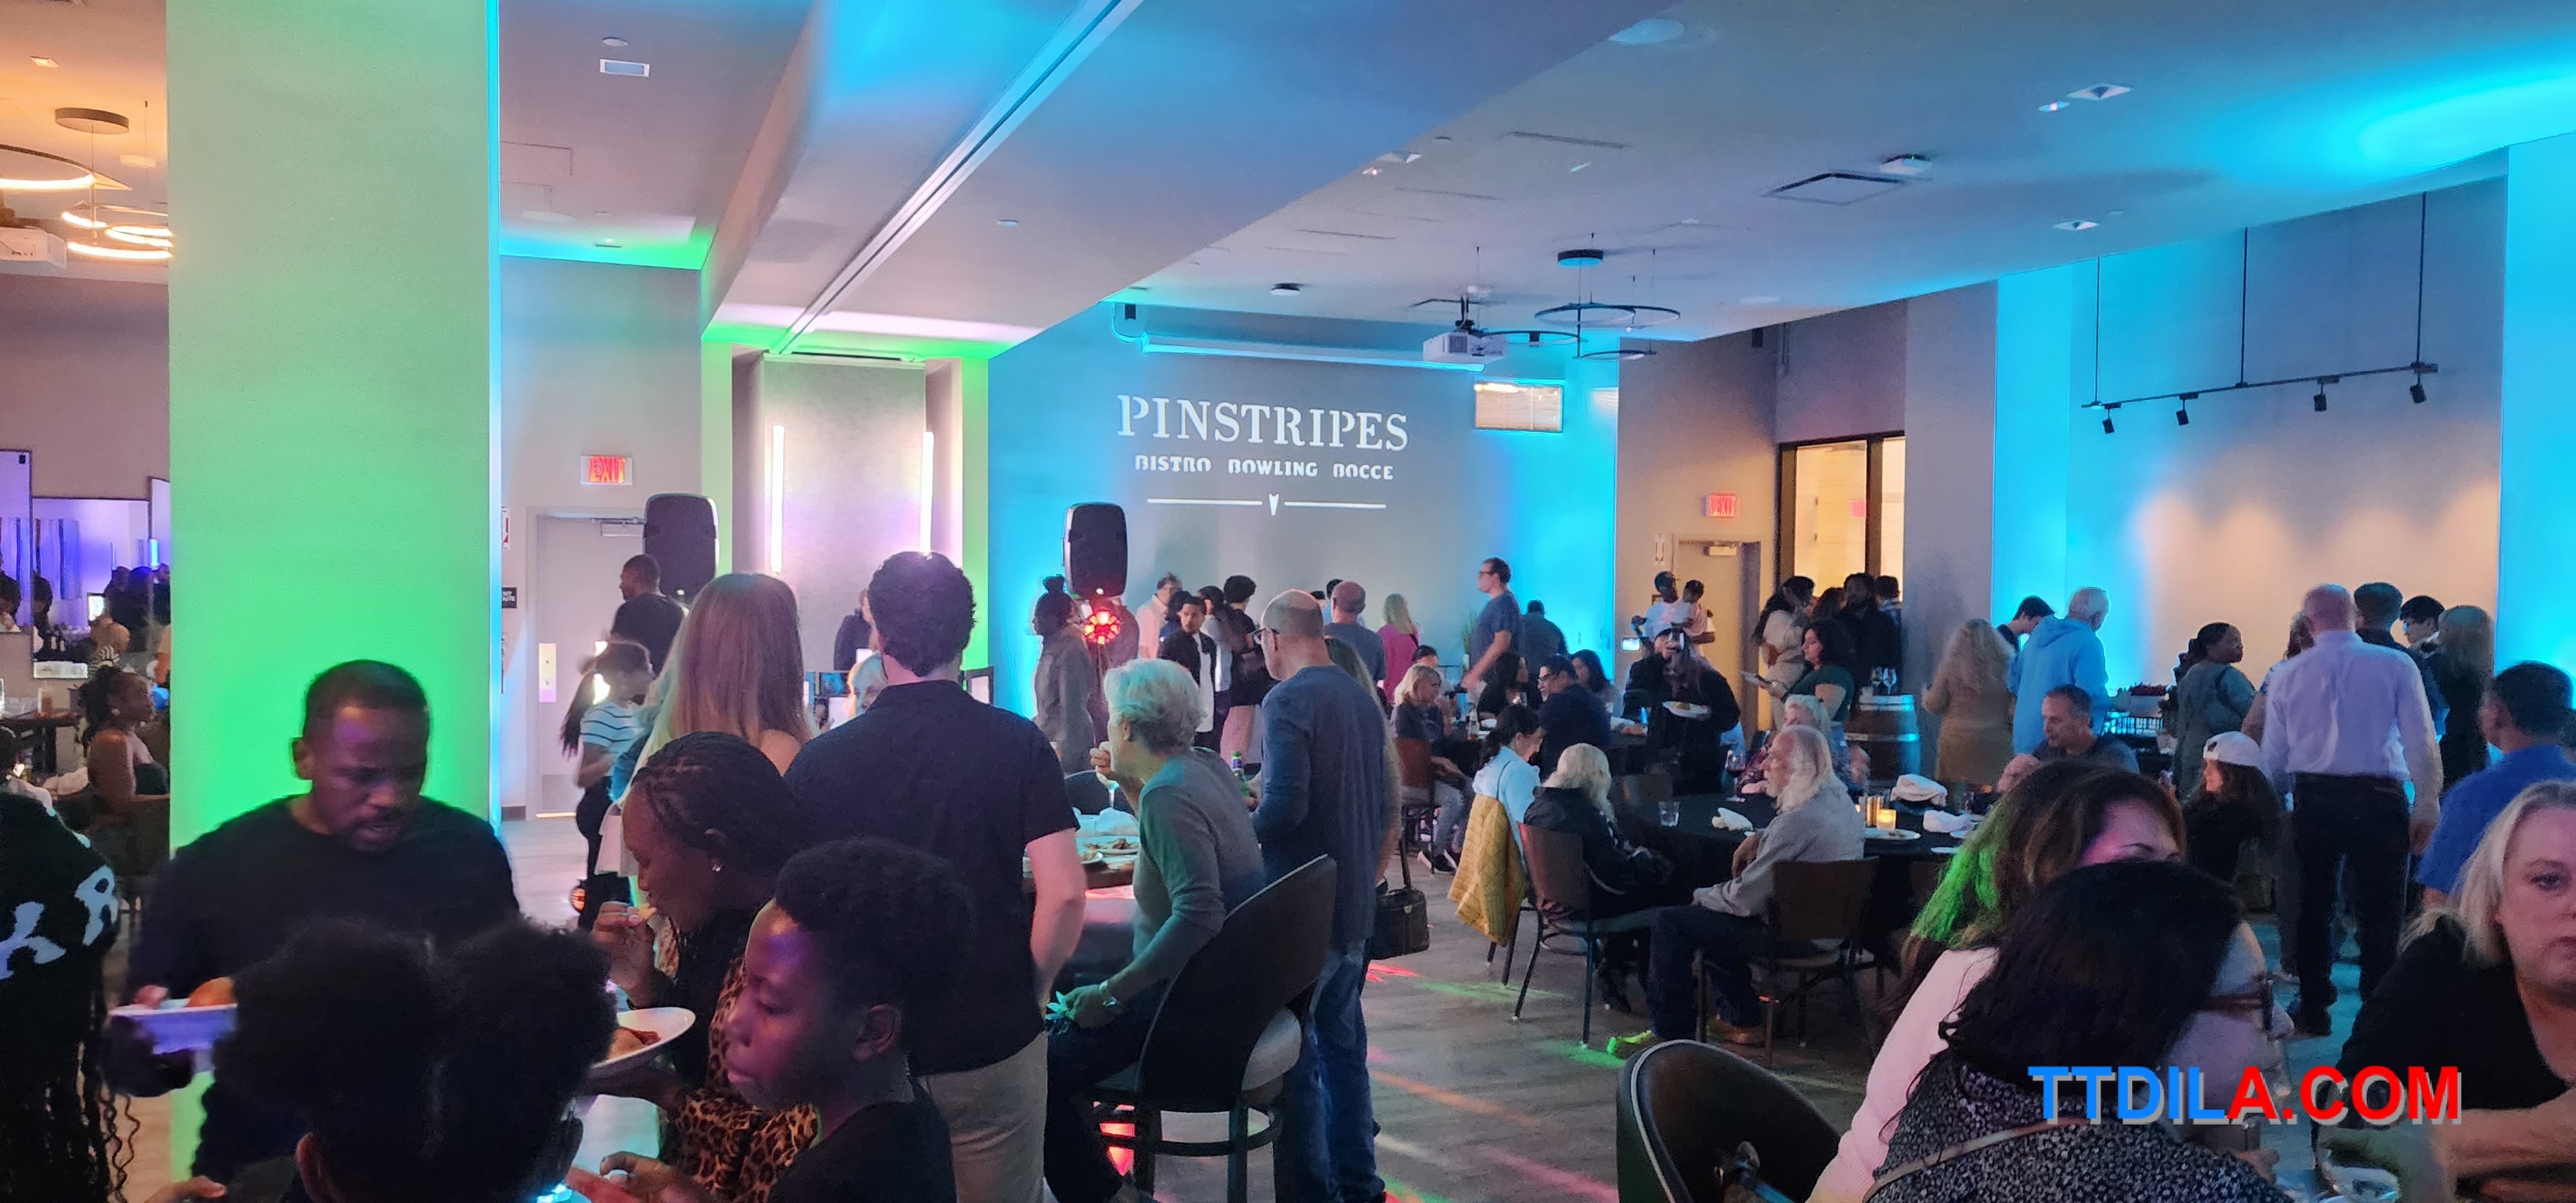 Pinstripes to Launch at Westfield Topanga